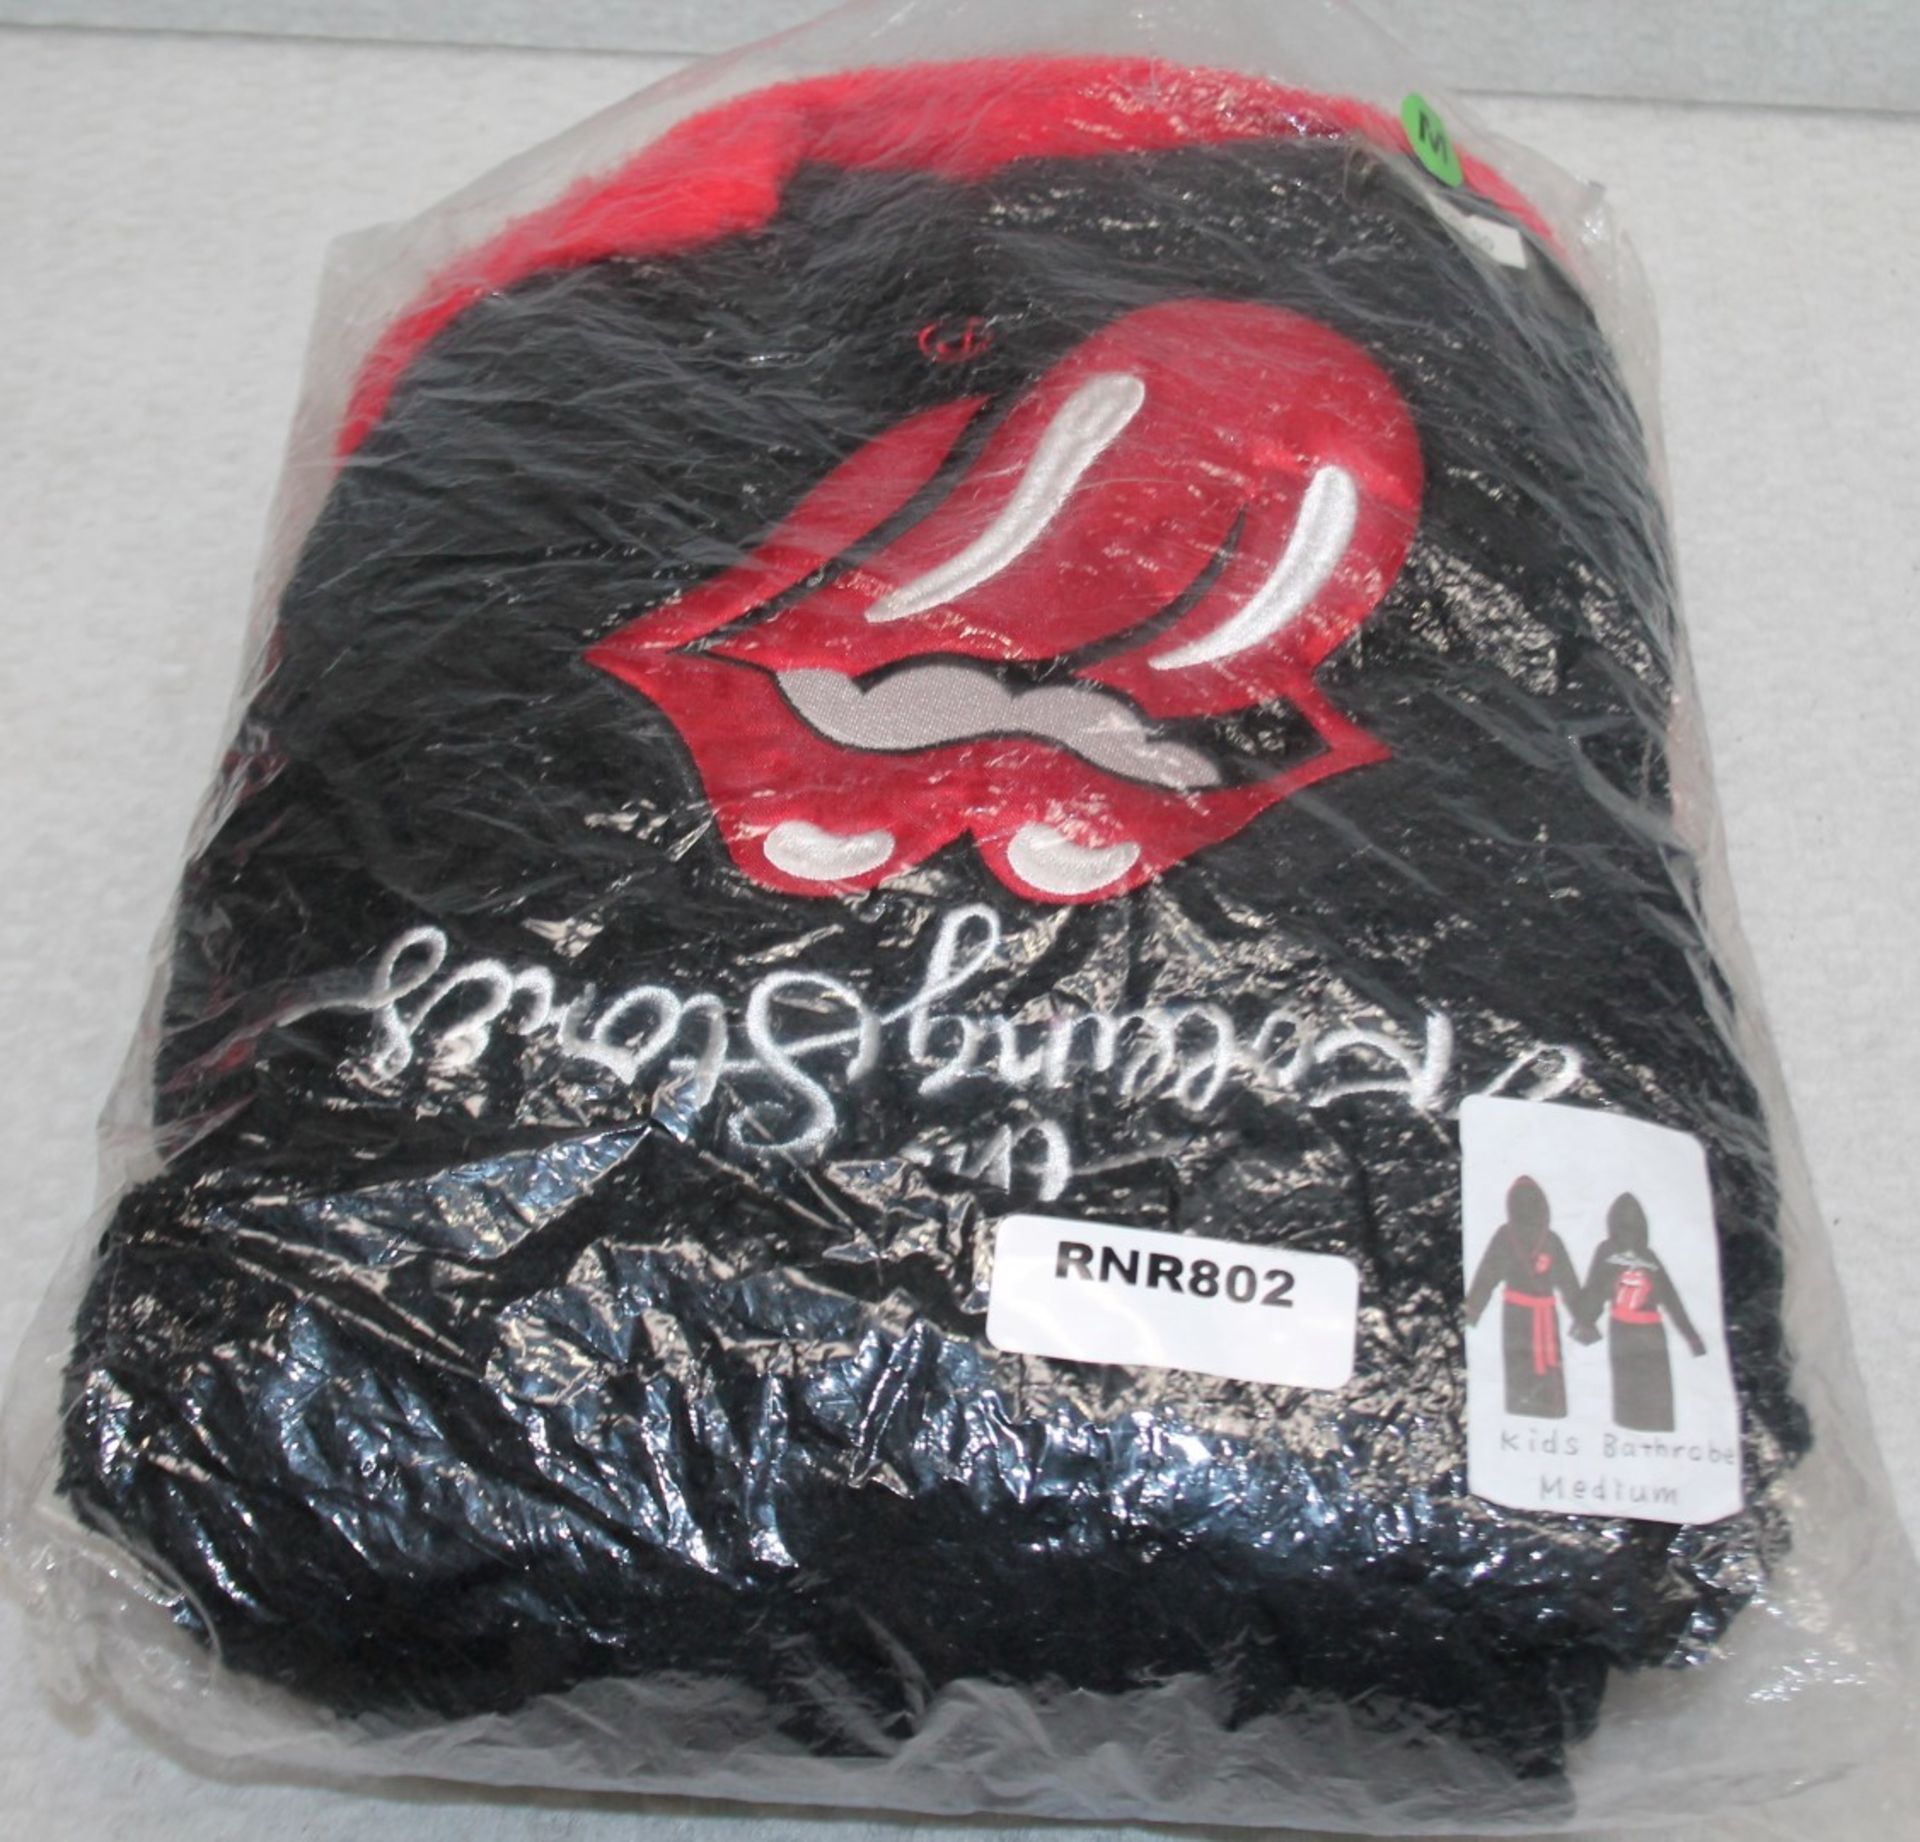 1 x Rolling Stones Children's Bathrobe - Size: Large - Features the Iconic Tongue and Lips Logo on - Image 2 of 3